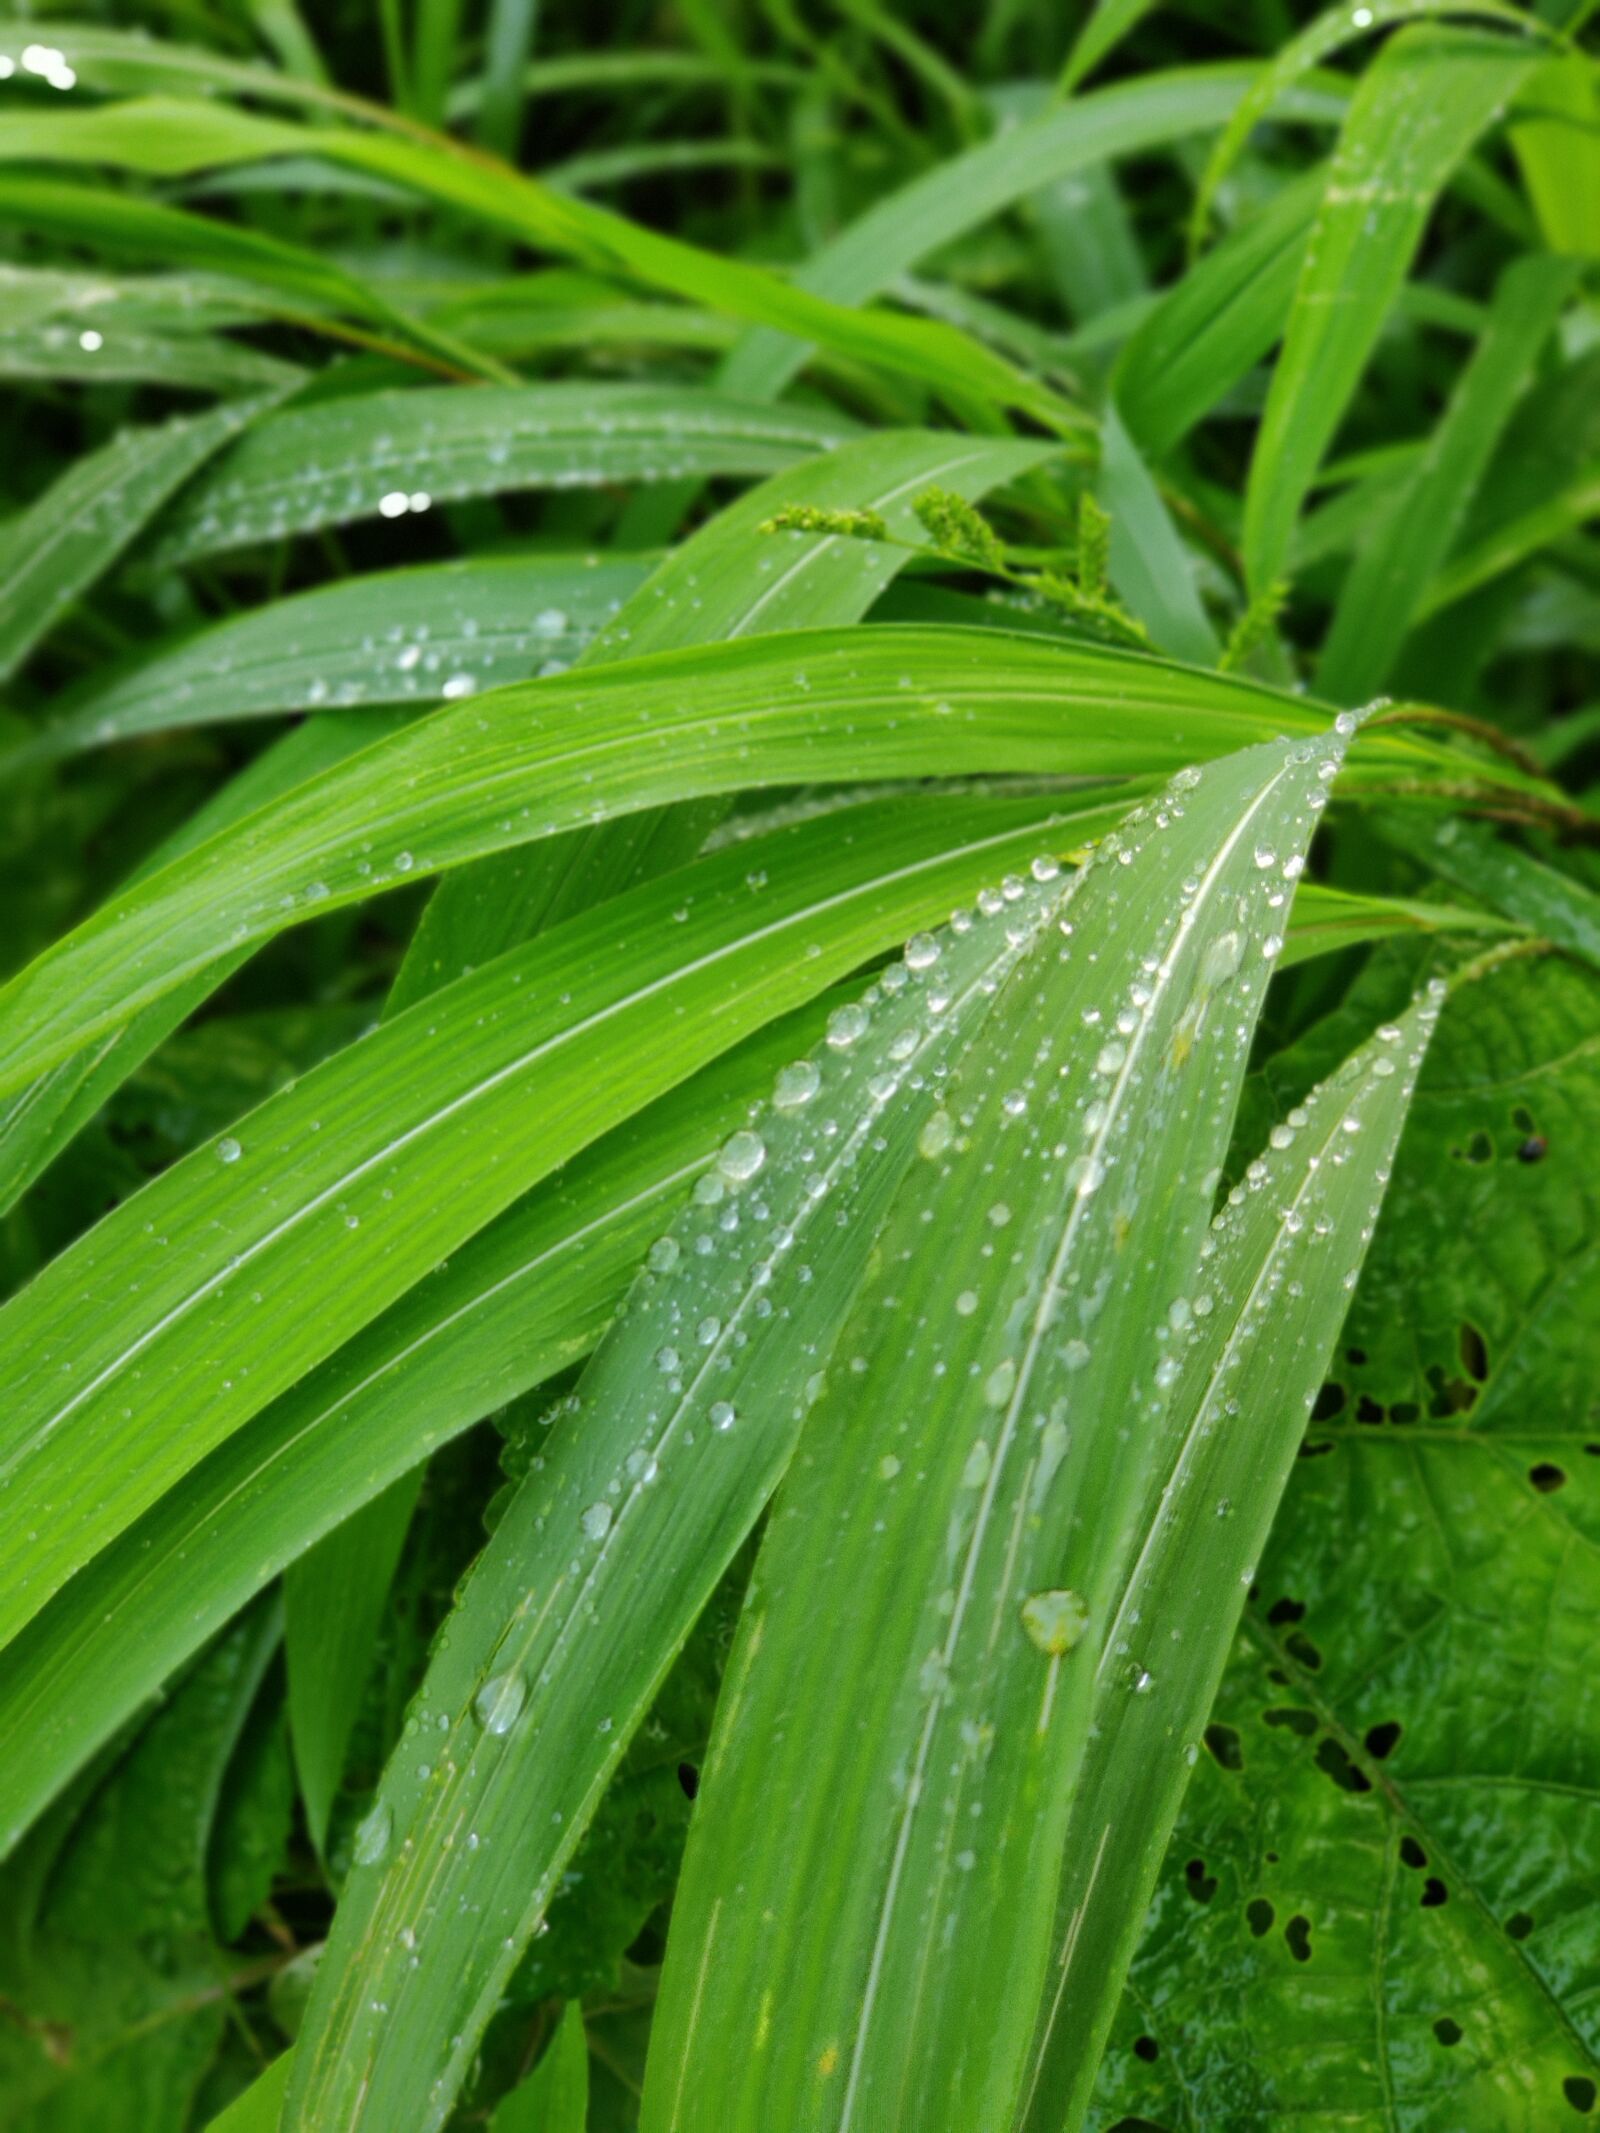 OnePlus HD1901 sample photo. Green, grass, tropical photography